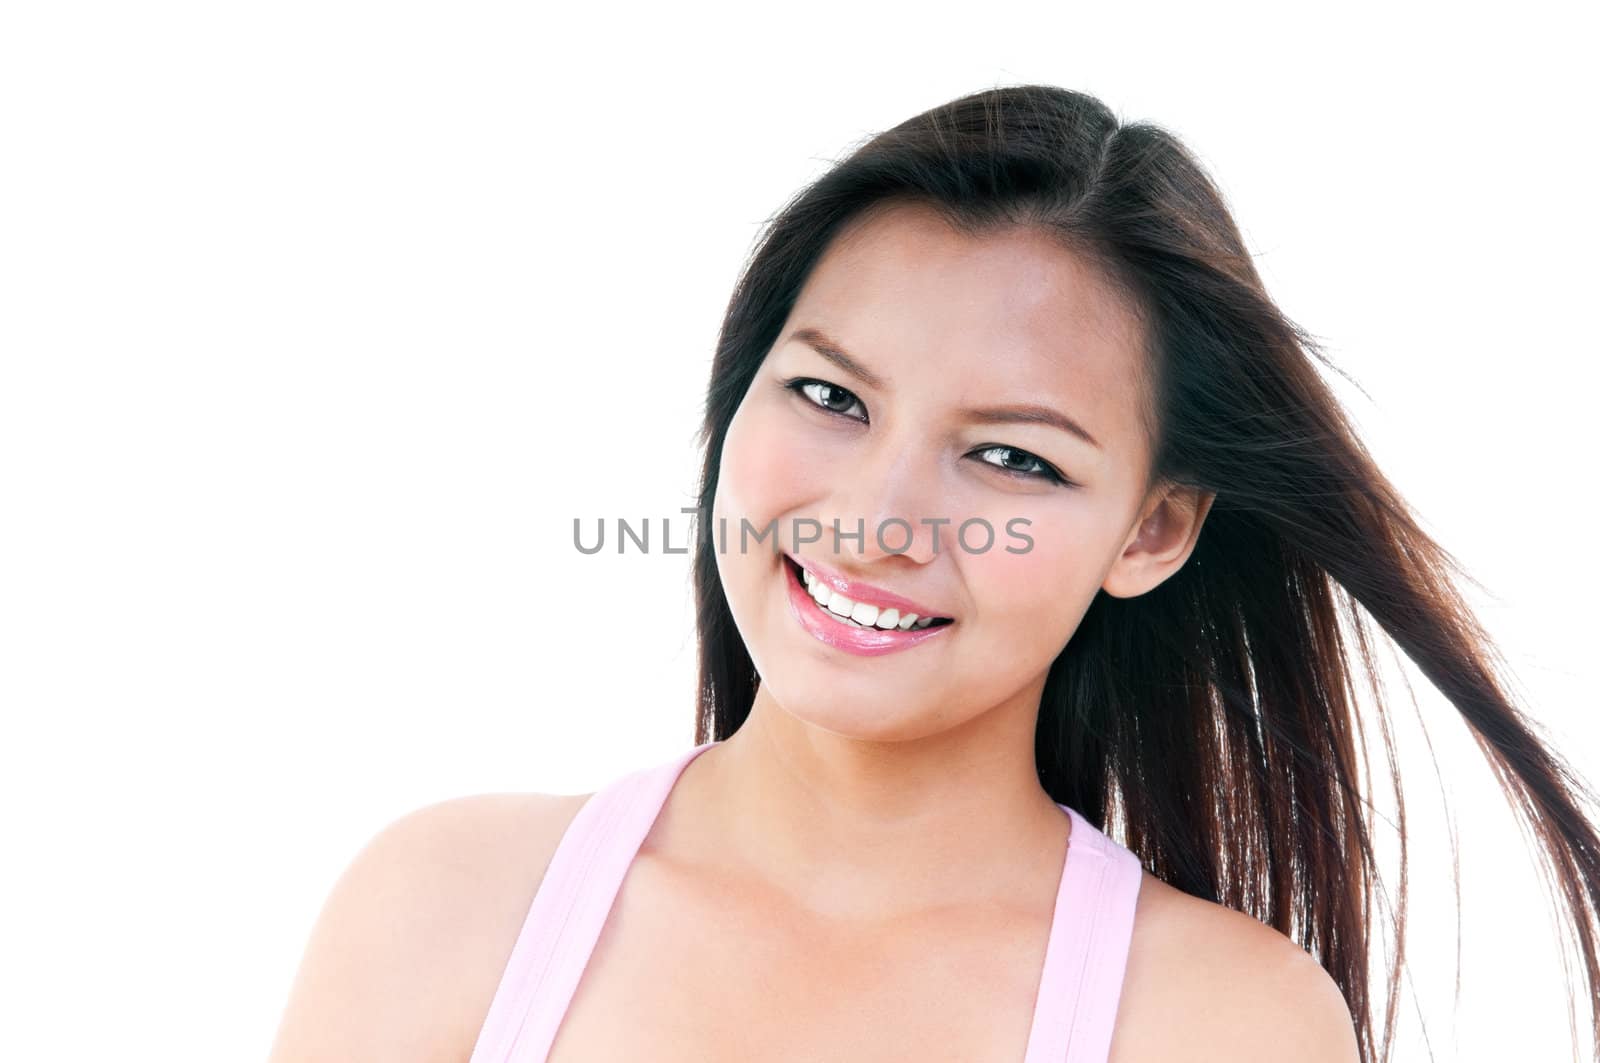 Close-up portrait of an attractive young woman smiling, isolated on white.